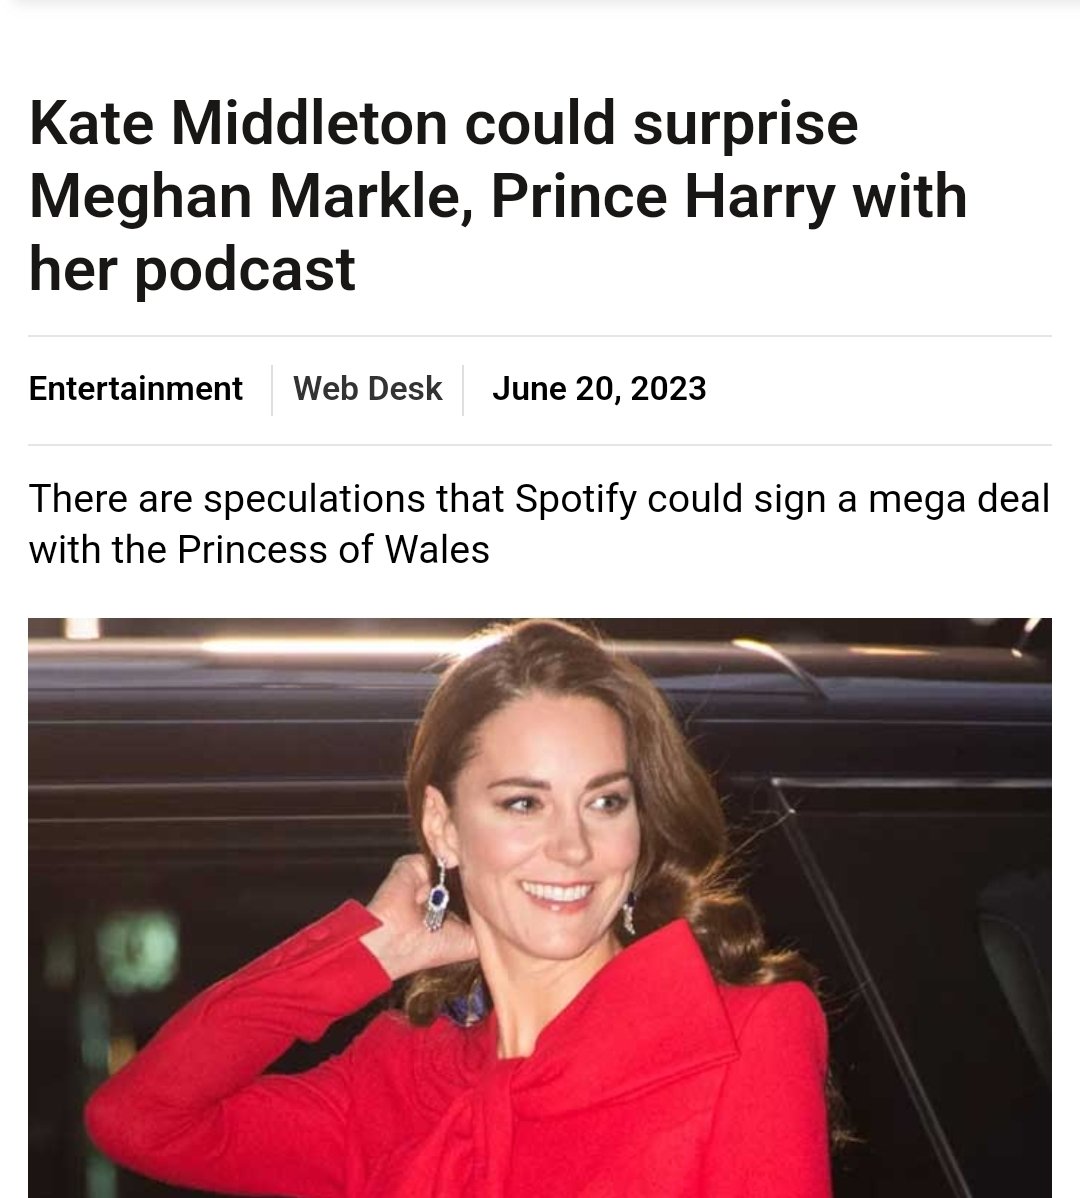 (Meghanmarkle #PrinceHarry #Spotify)

Who's gonna listen..to mumble?

There are speculations that Spotify could sign a mega deal with the Princess of MUMBLE.

Lma🤣🤣🤣

You can't make this up or did they?
🤣🤣🤣🤣

#PrincessMumble
#KateMiddleton

geo.tv/amp/494607-kat…